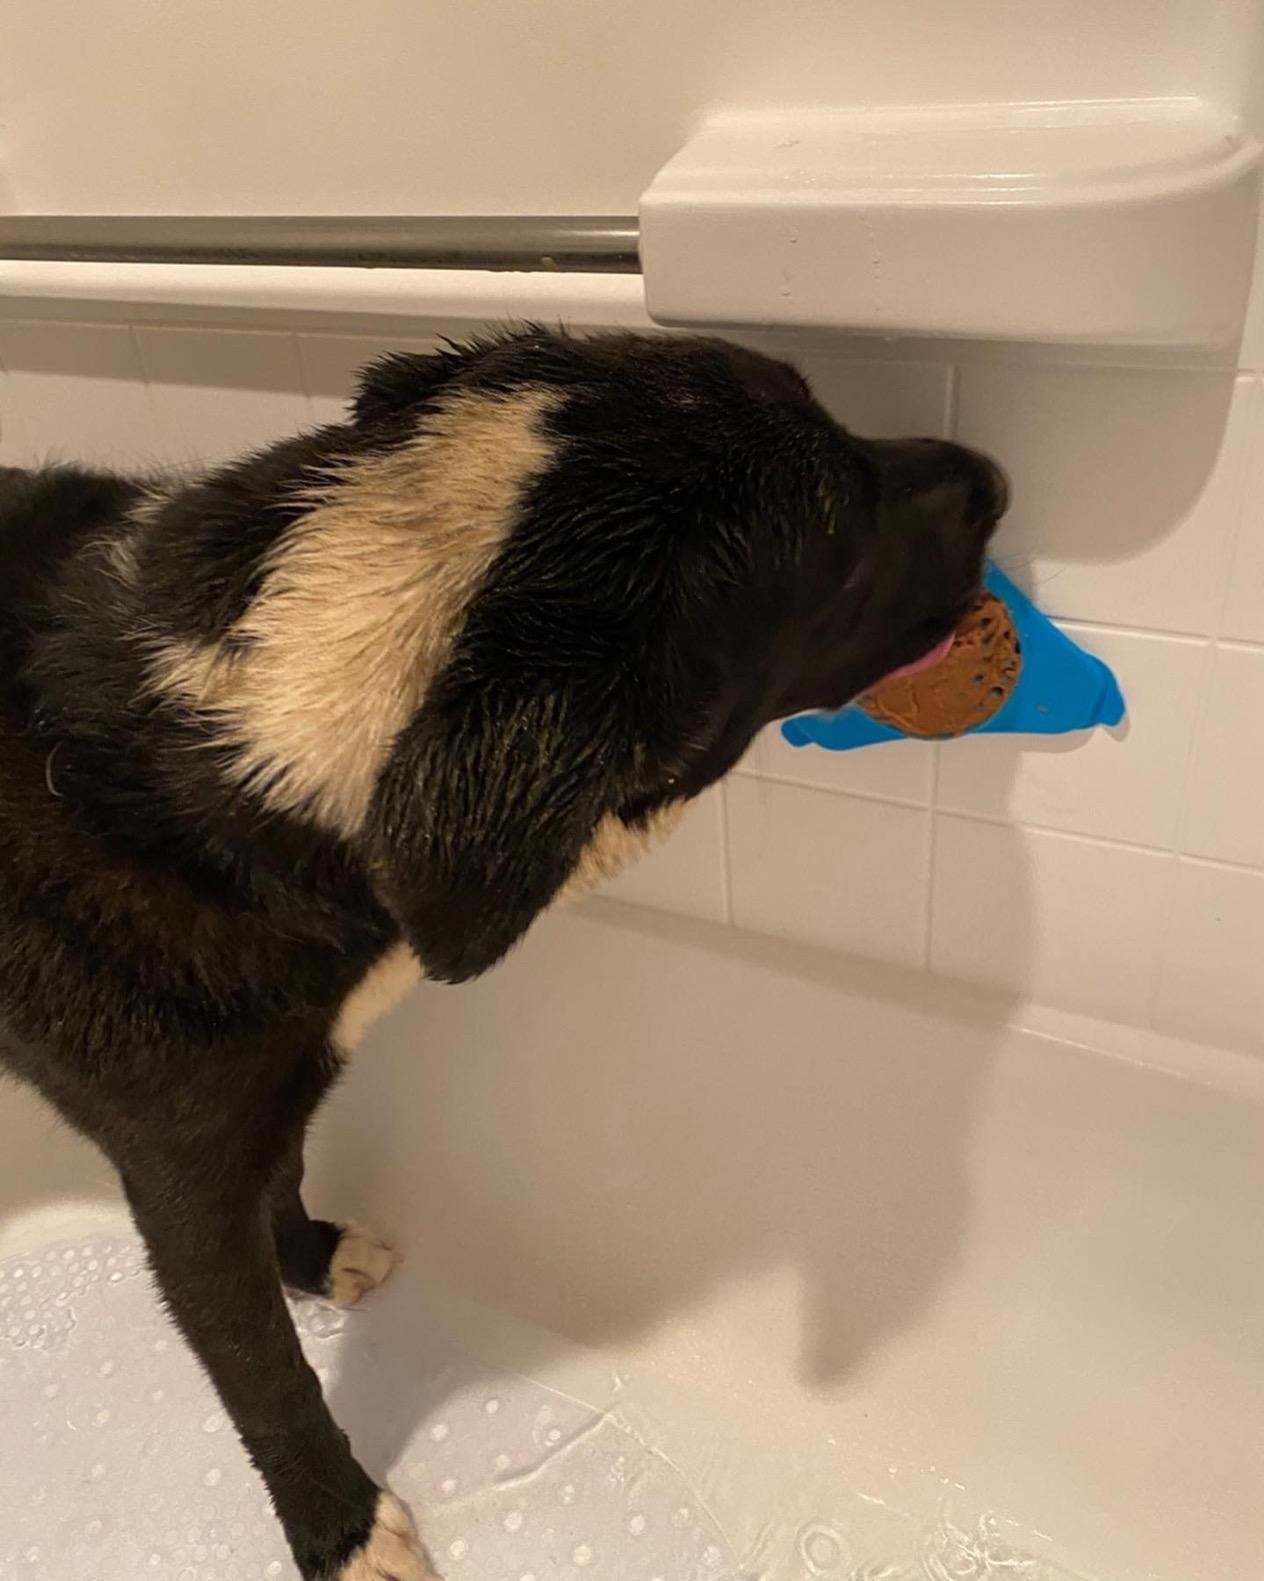 The pad suctioned to the tub with dog eating off peanut butter from it